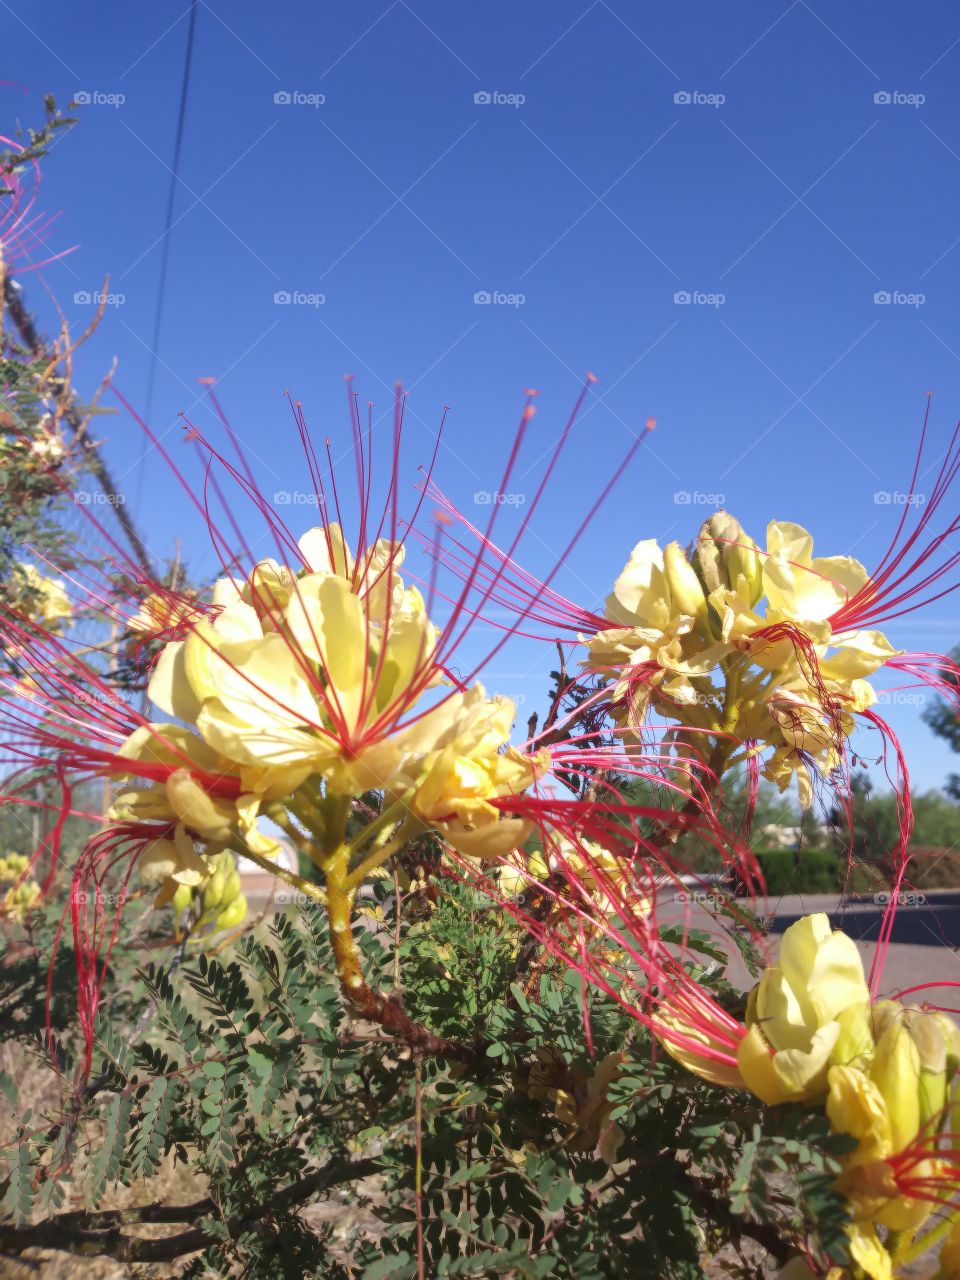 flower yellow petals red pistal bush arid hot mexican flower sonora